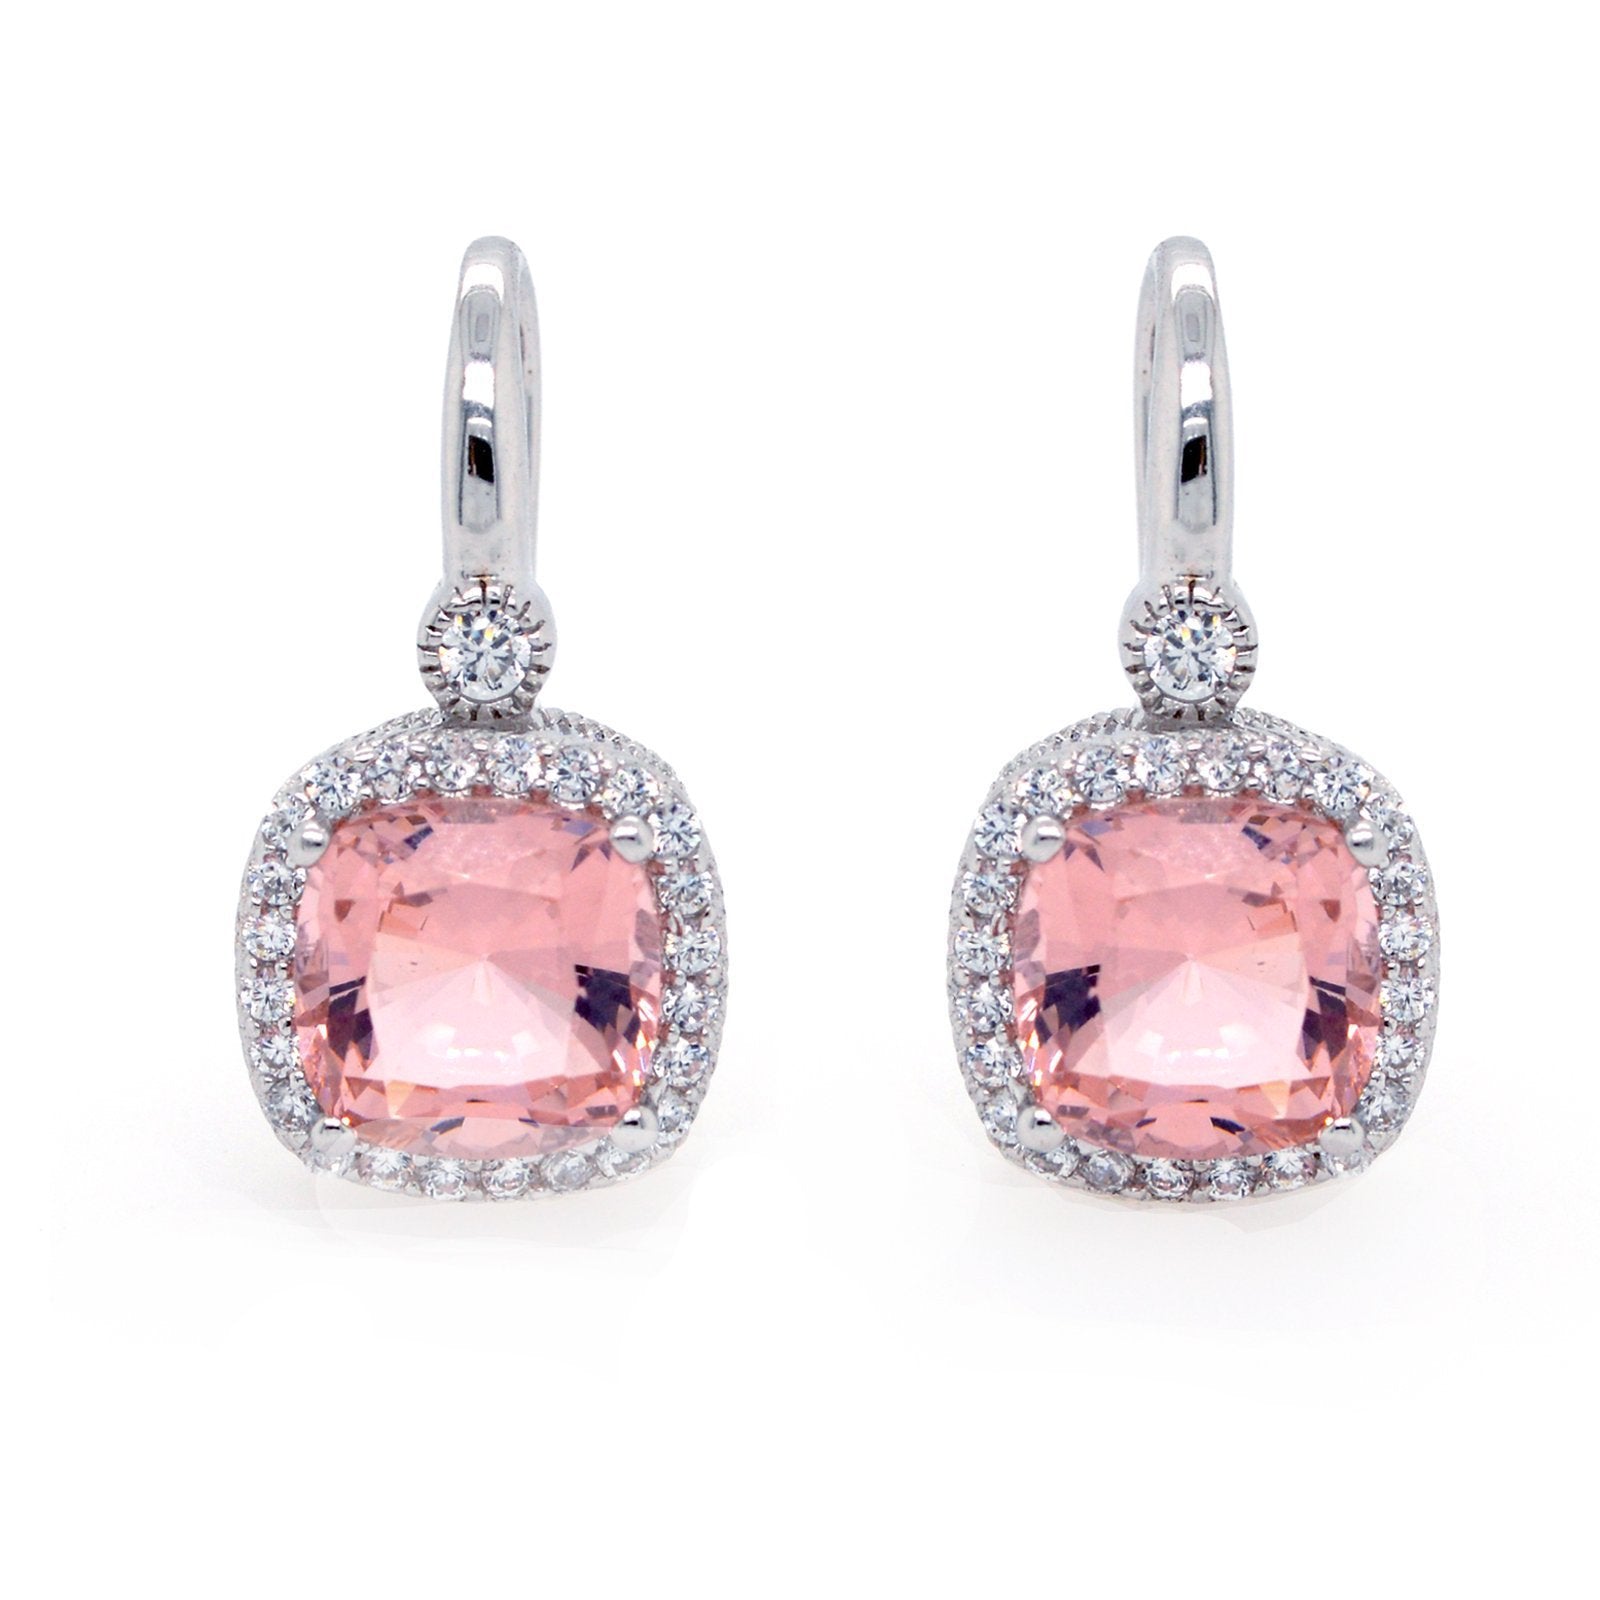 Sybella Earrings Silver Sybella Square Pink Earrings